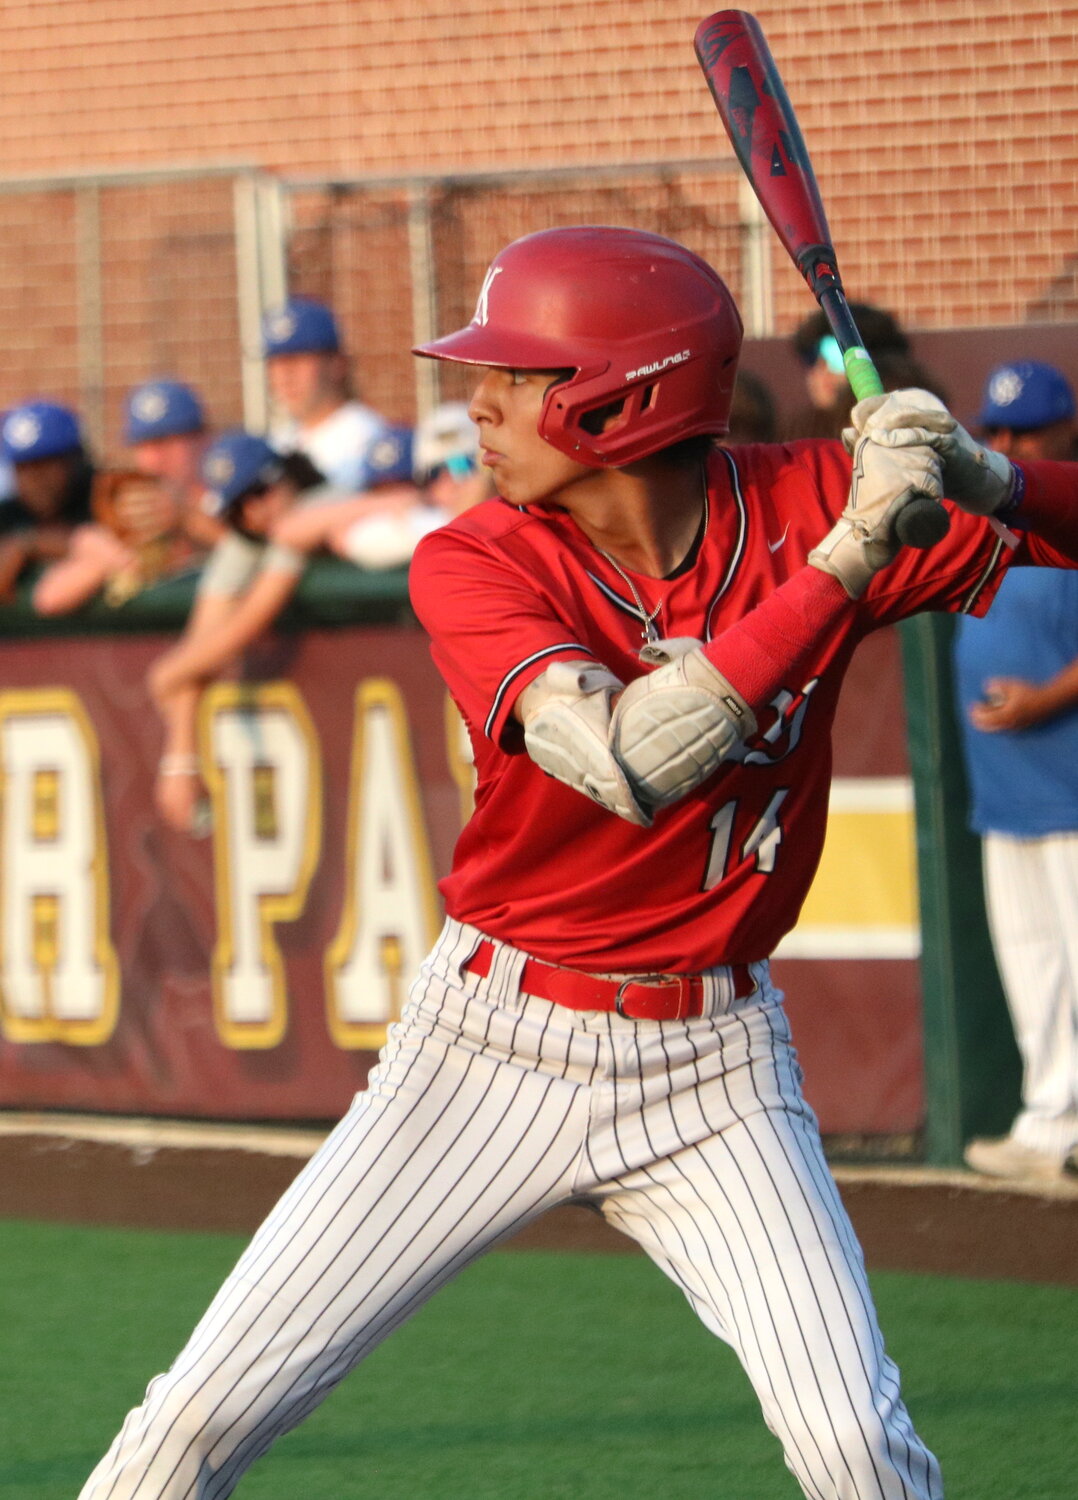 AJ Atkinson hits during Wednesday's Regional Semifinal between Katy and Clear Springs at Deer Park.